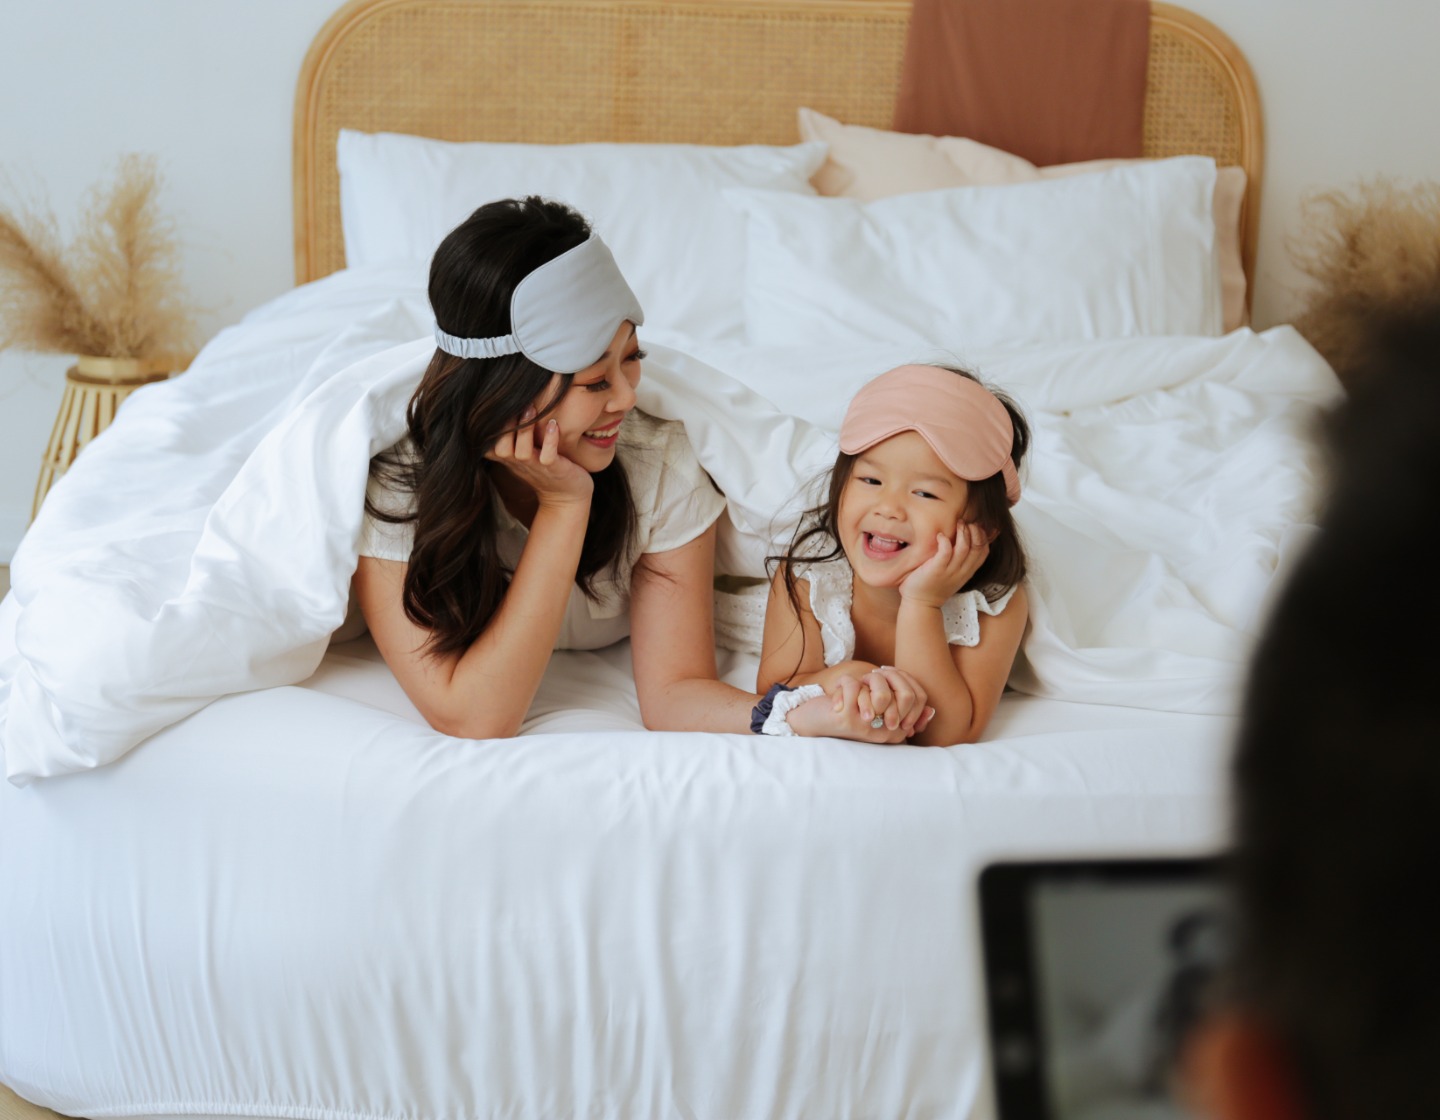 NakedLab organic bedsheets - Joyce Lau and her daughter Pia